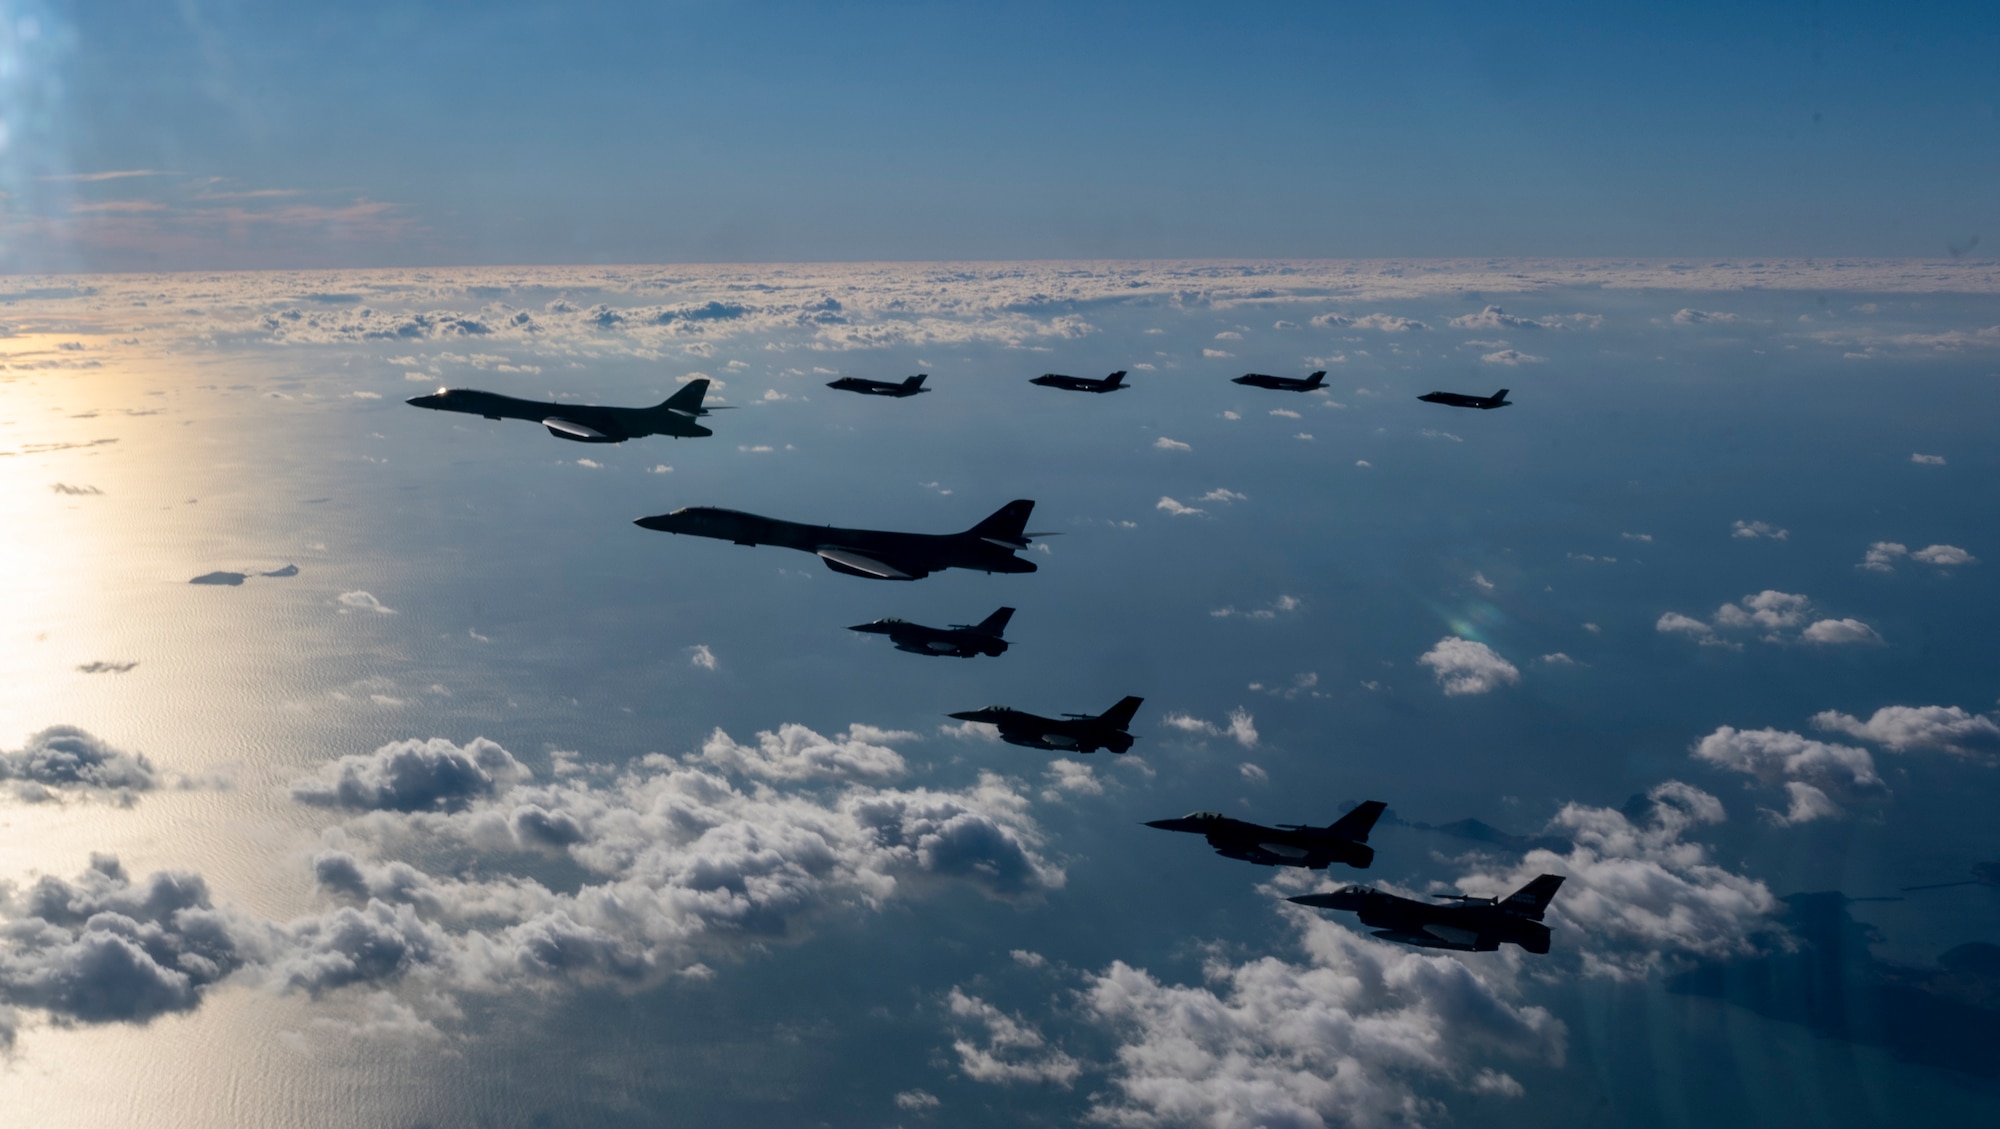 51st Fighter Wing’s F-16’s joined with Indo-Pacific Command B-1B bombers and Republic of Korea F-35A’s in a combined training flight over the Korean Peninsula as part of Vigilant Storm 23, Nov. 5, 2022.